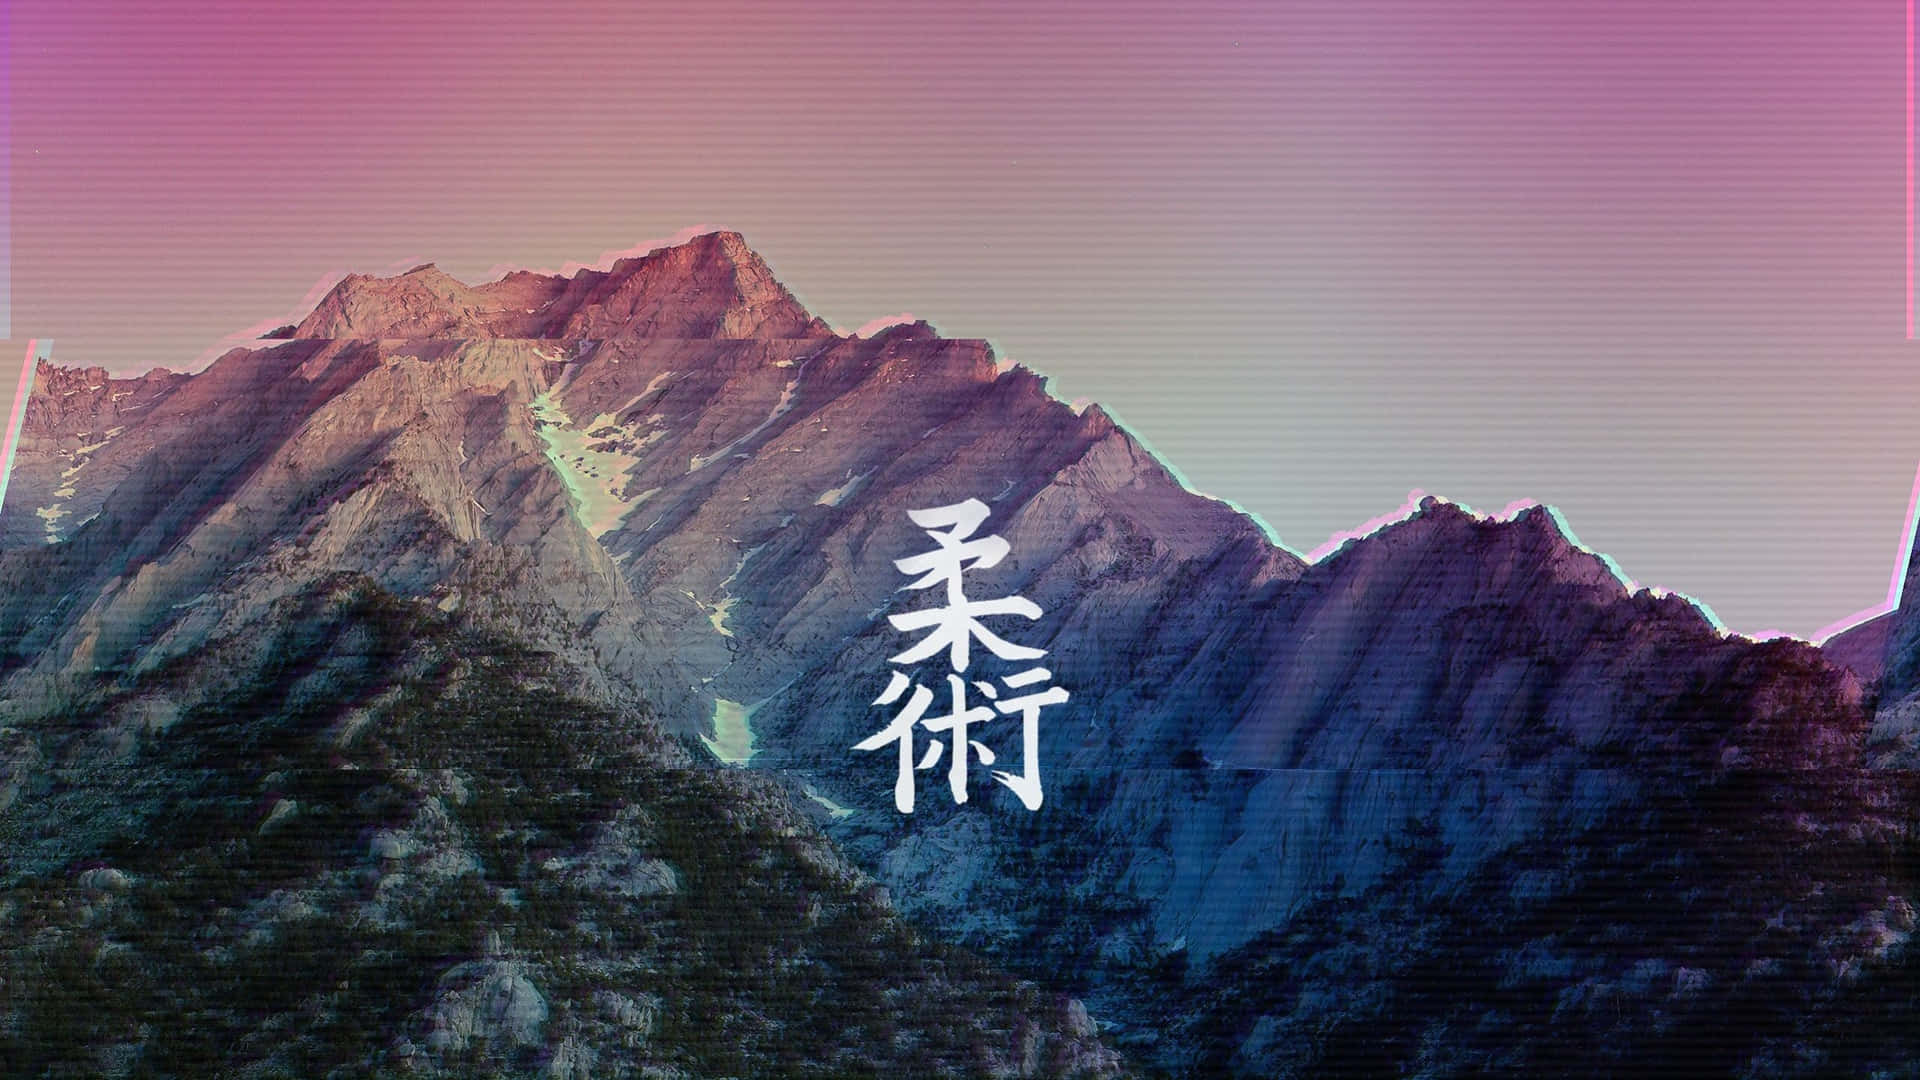 Dive into the surreal world of Aesthetic Vaporwave Wallpaper